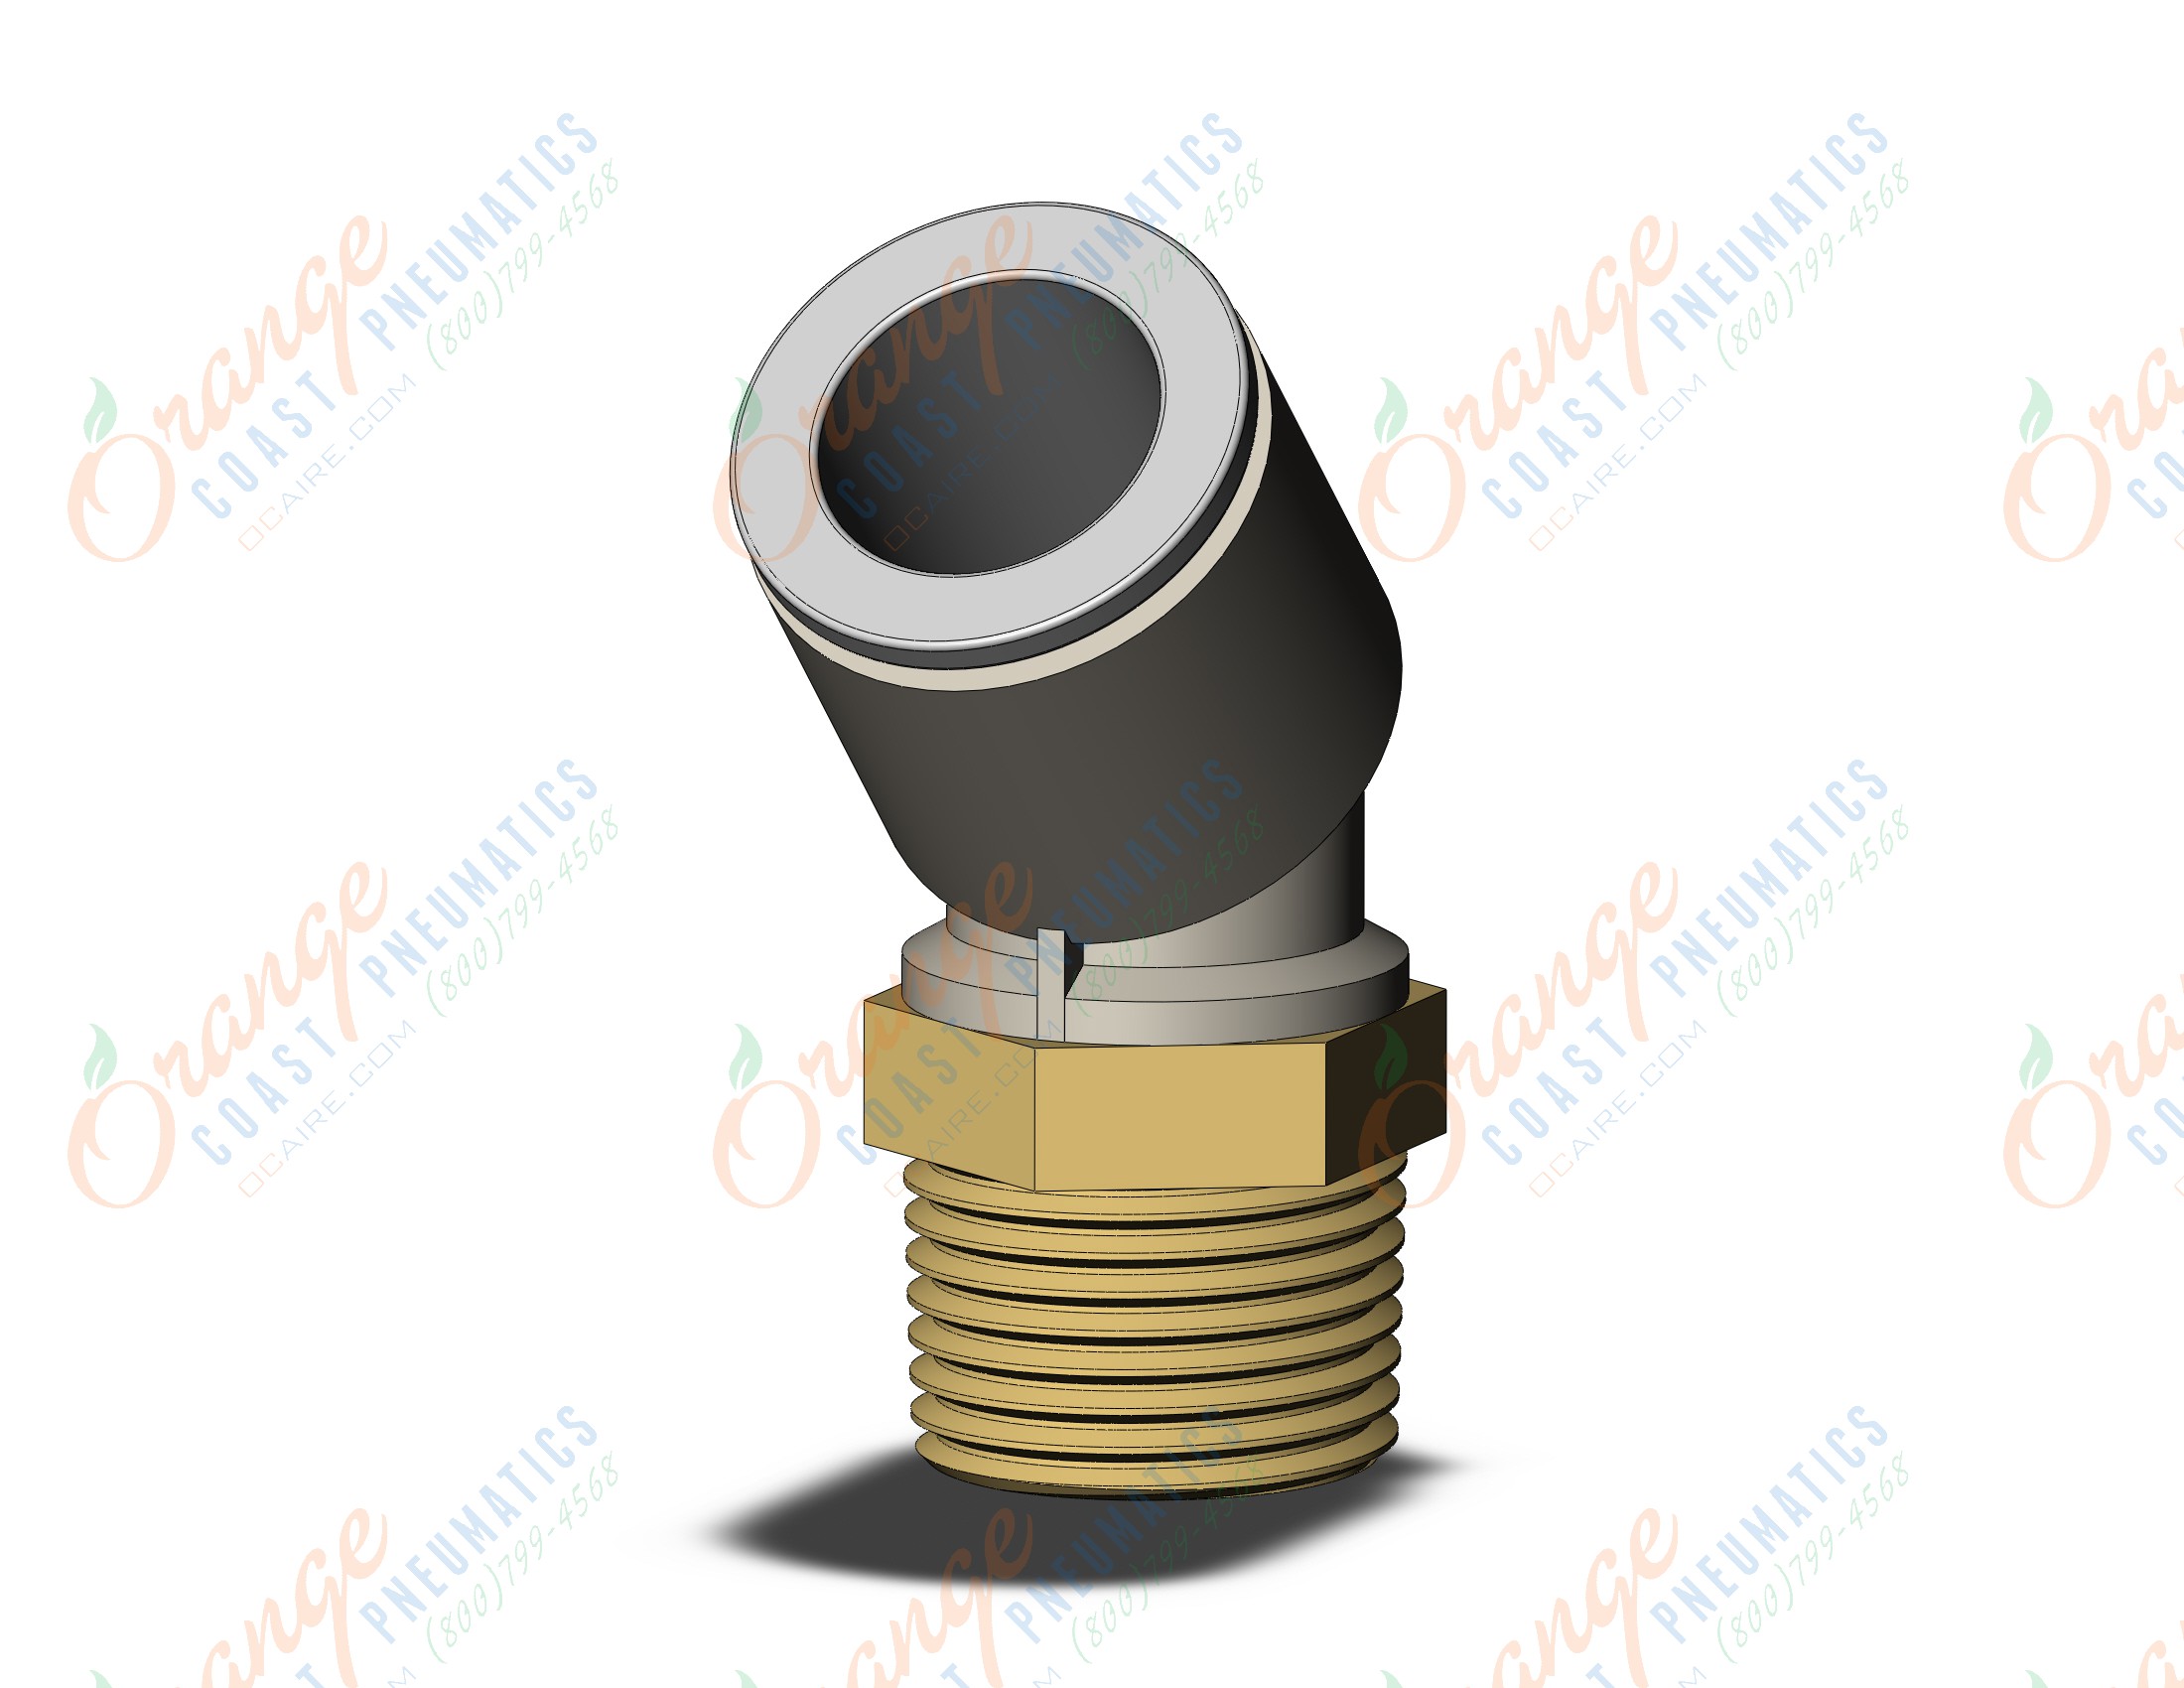 SMC KQ2K12-03A fitting, 45 deg male elbow, KQ2 FITTING (sold in packages of 10; price is per piece)